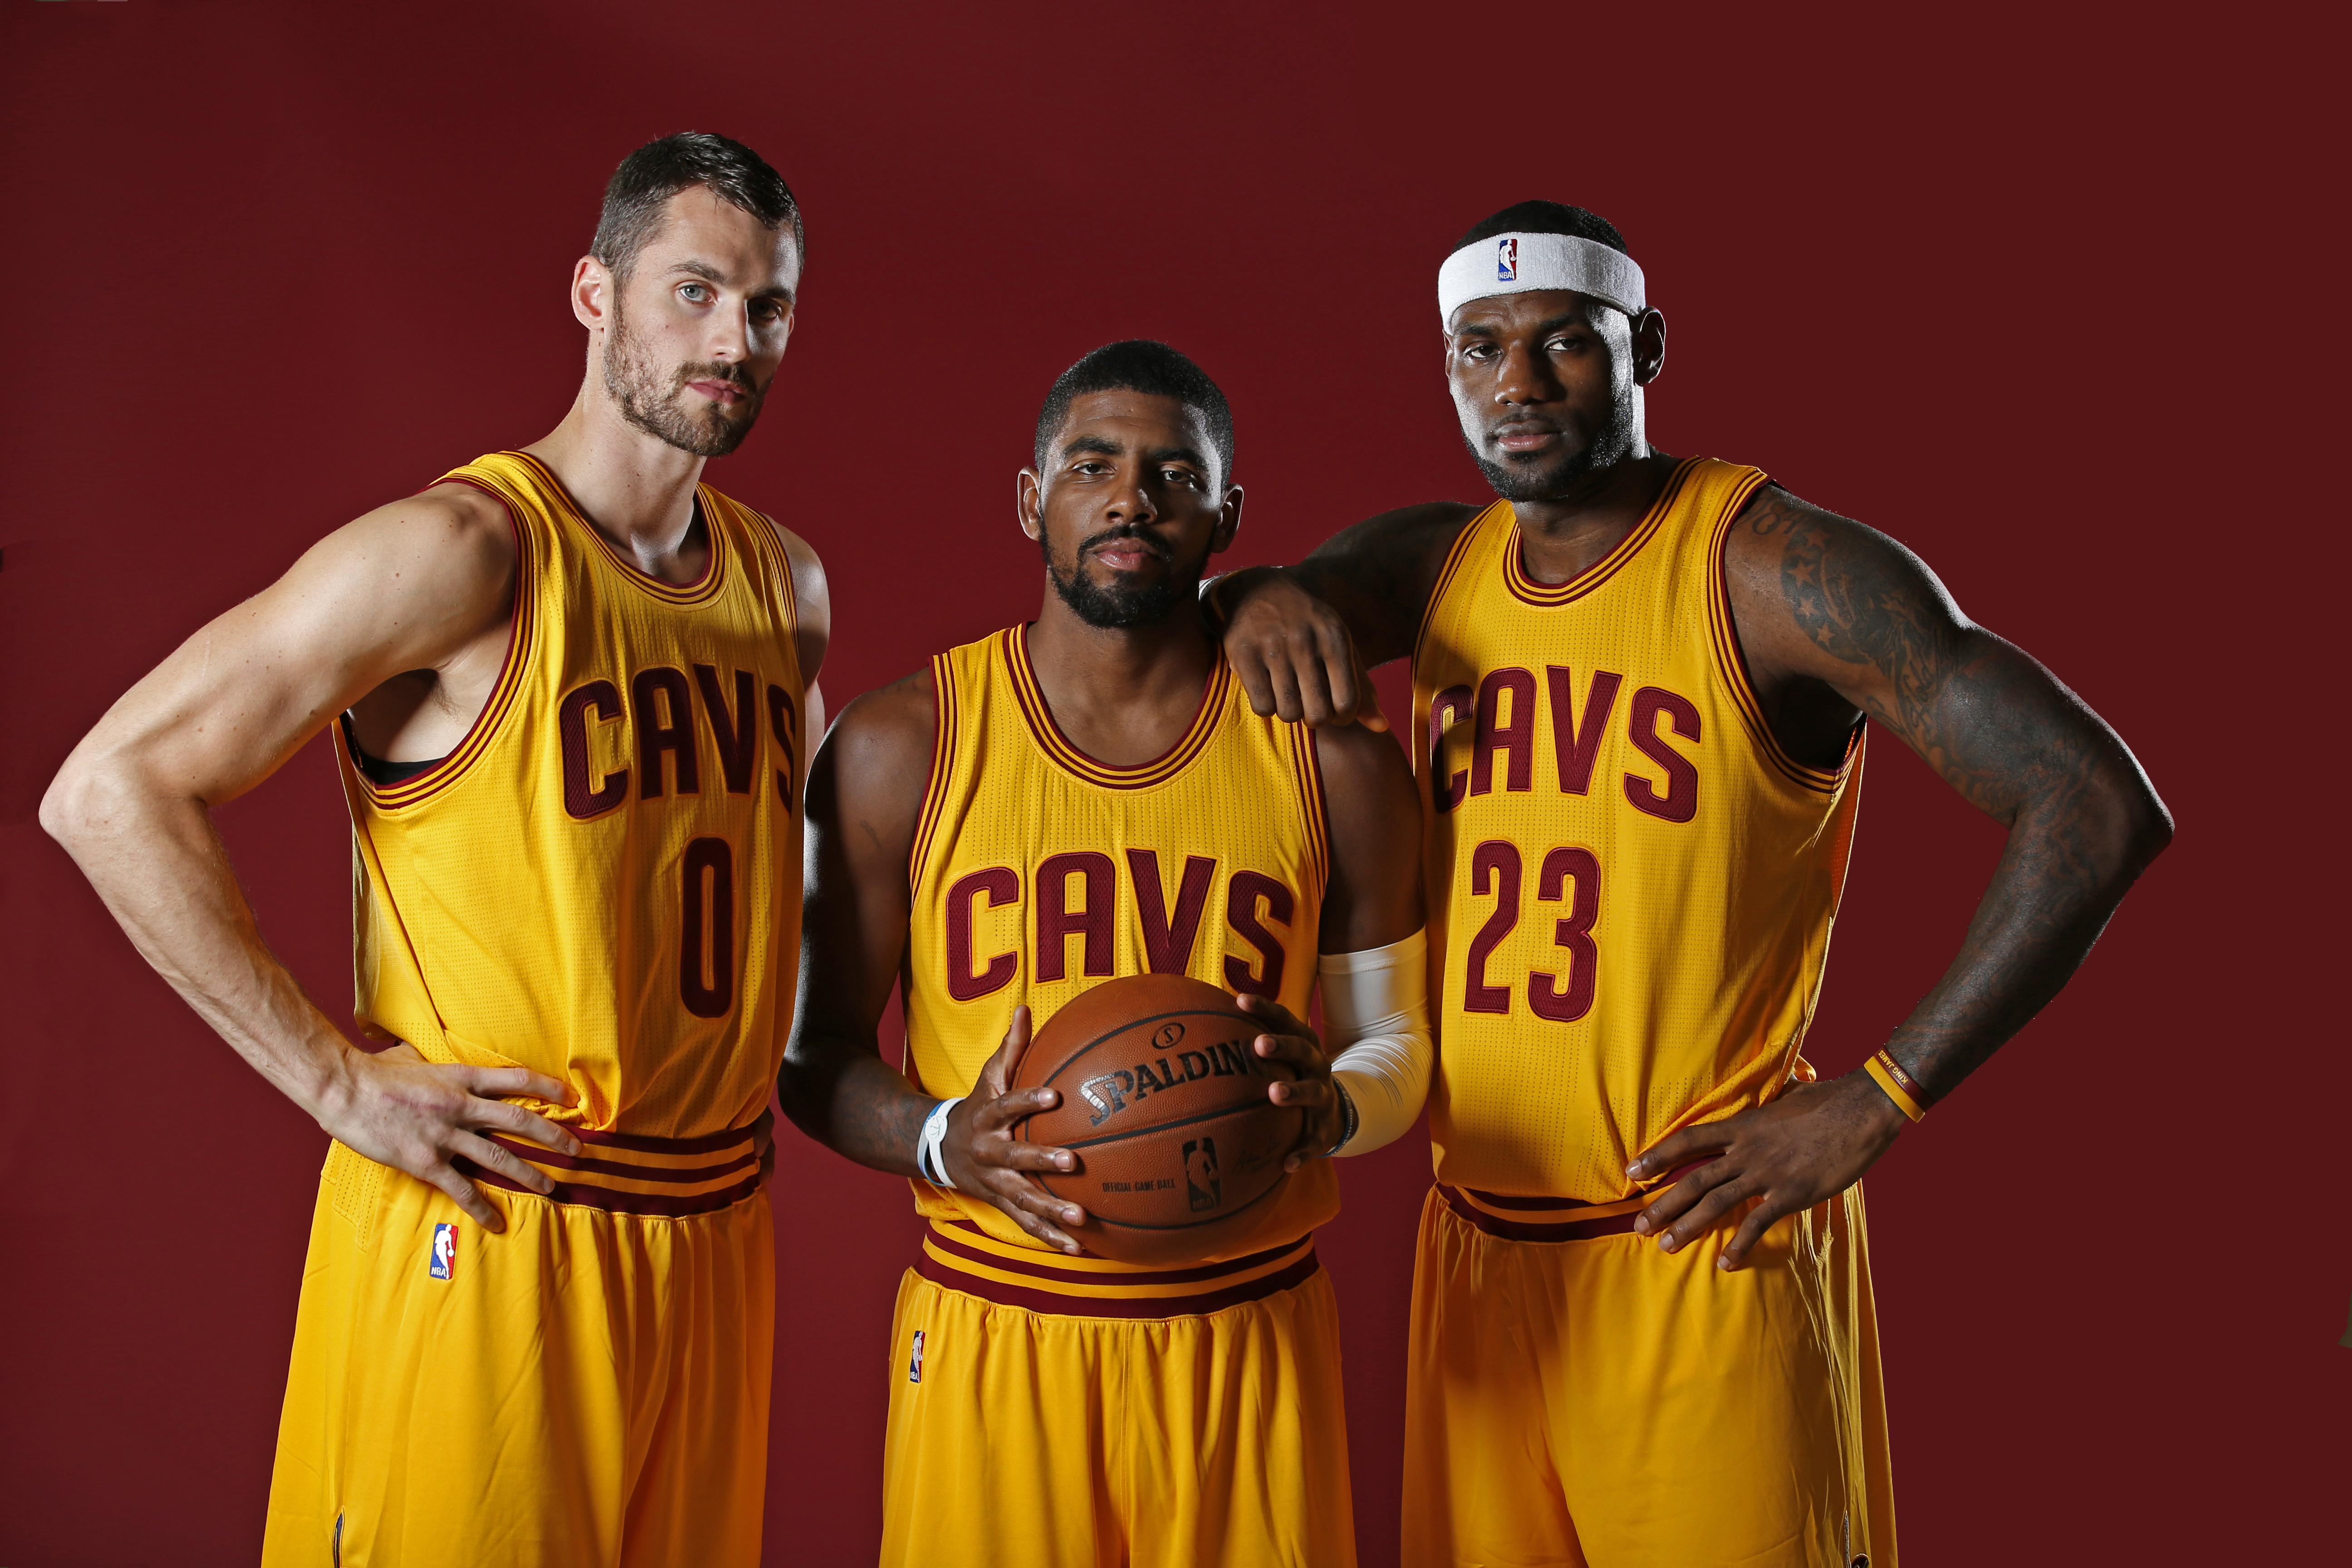 Cleveland Cavaliers, Kyrie Irving, Kevin Love - Cavs 2015 - HD Wallpaper 